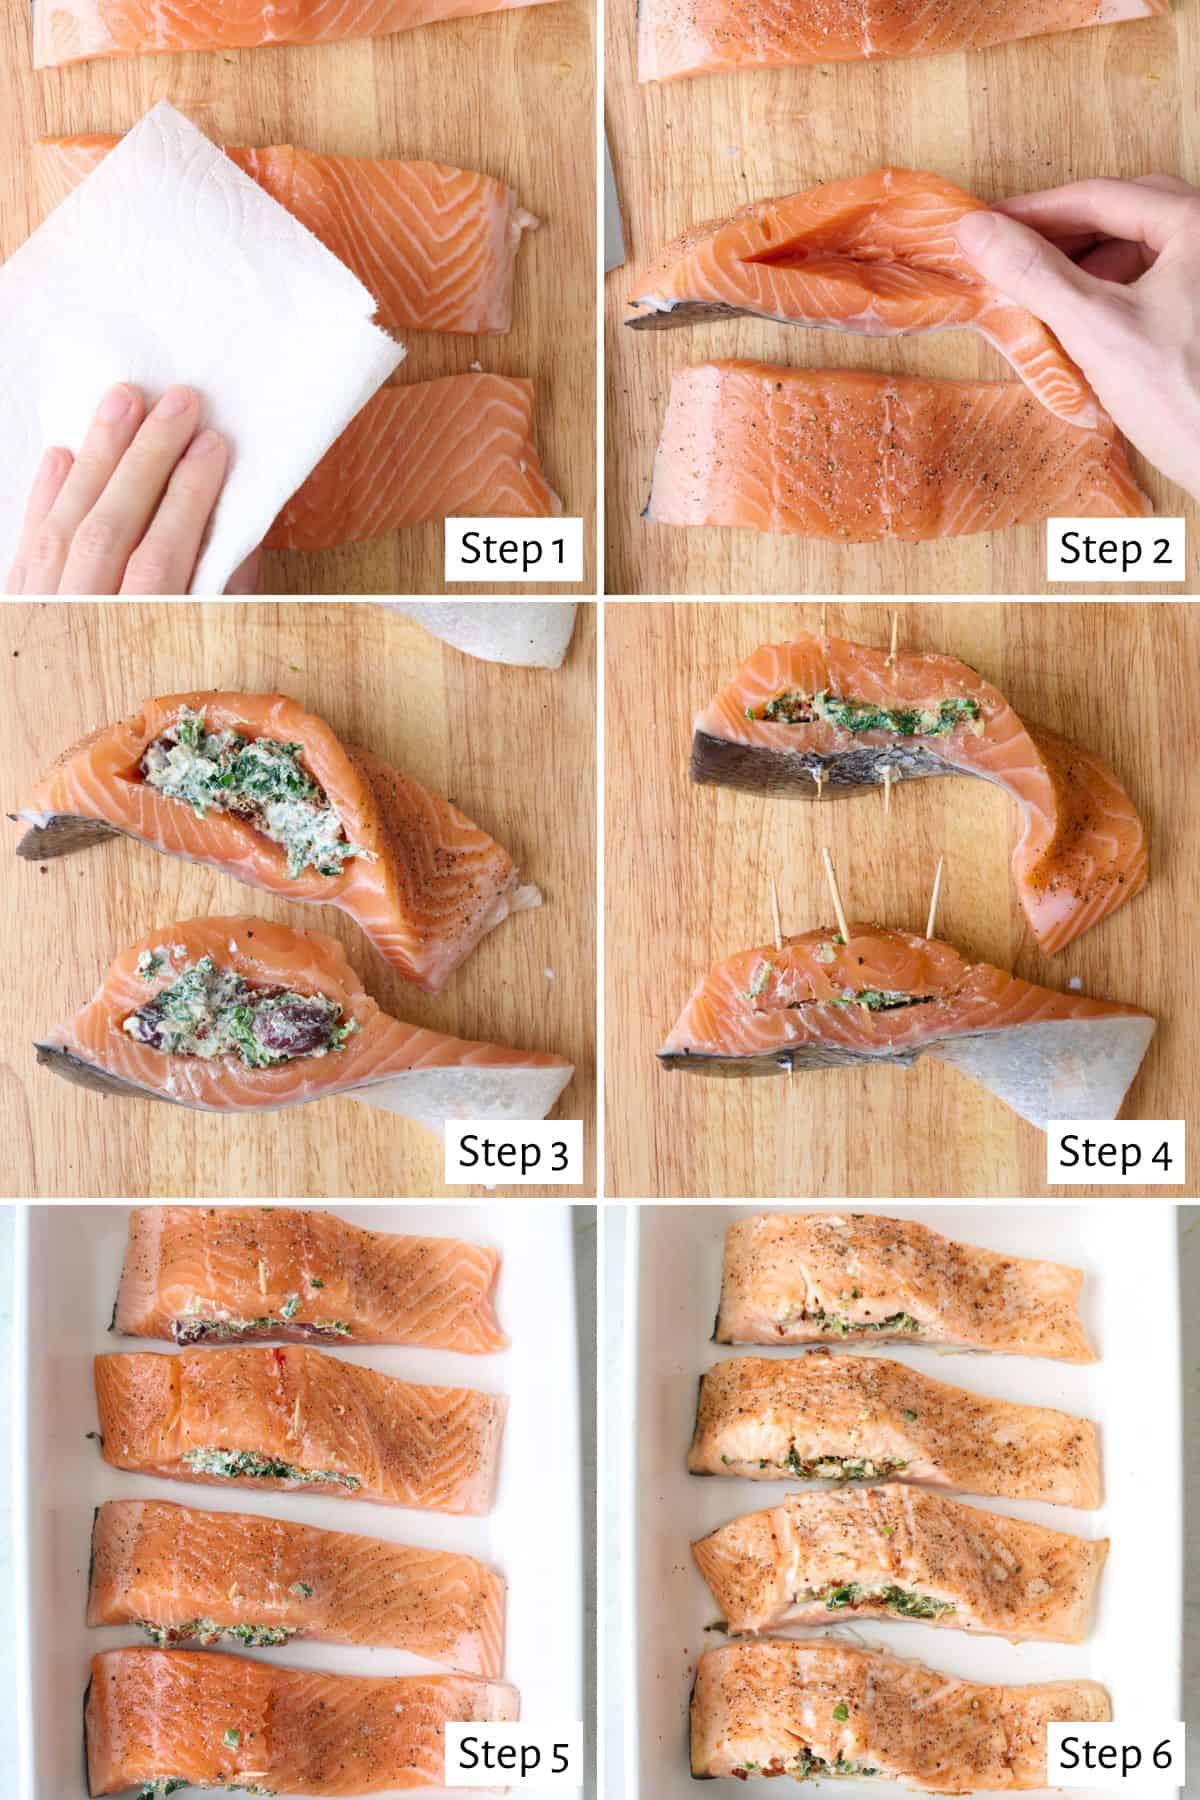 4-image collage of preparing salmon: 1 - Patting salmon fillets dry on a cutting board; 2 - After slicing a pocket and seasoning fillets with salt and pepper; 3 - After stuffing with yogurt filling; 4 - After closing the fillets with a toothpick.